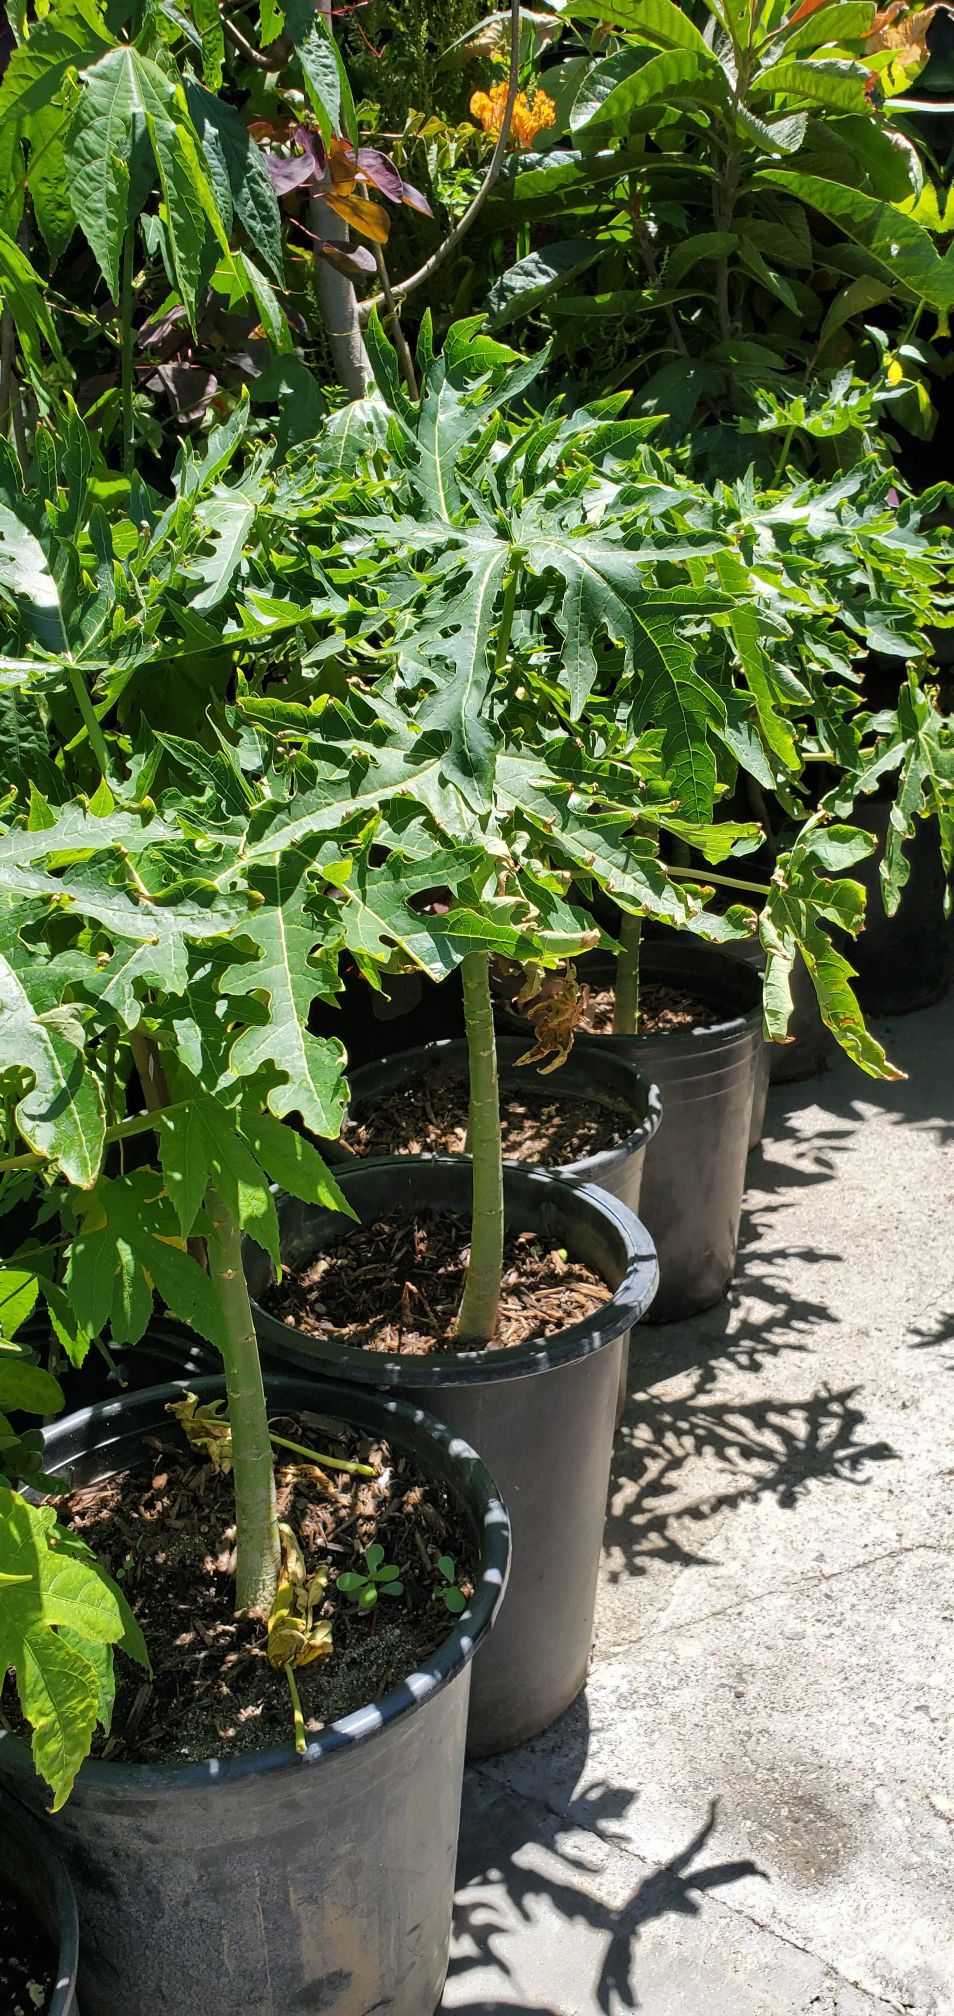 ALL ORGANIC PLANTS,Papaya trees, and Alcatraz flowers. Other plants on sale! Different types and prices $ backyard nursery!